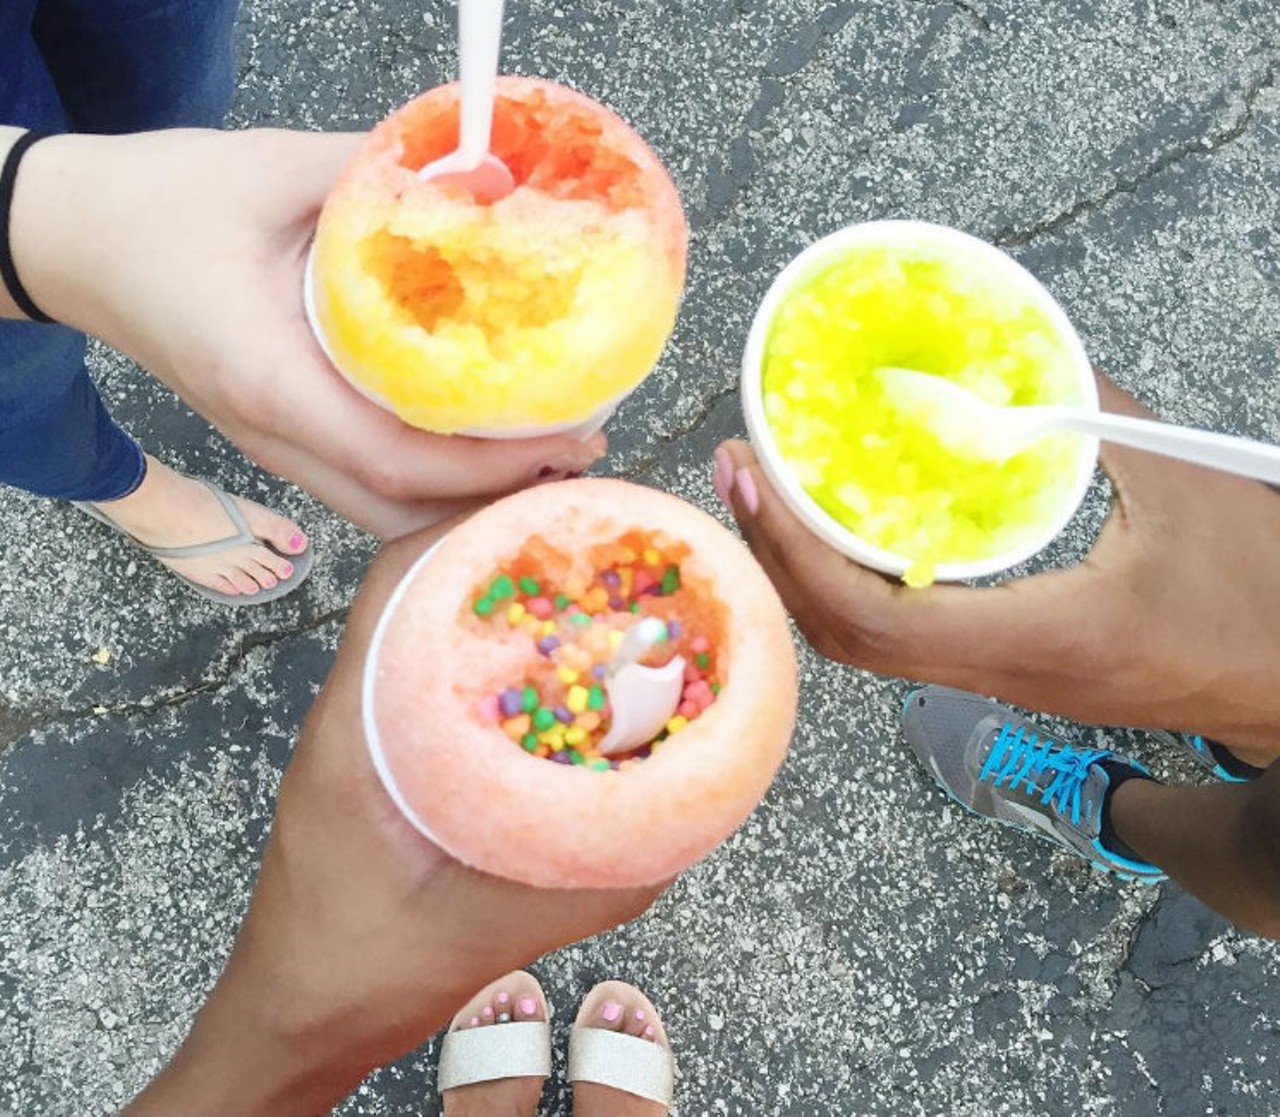 Visit Tropical Moose
(140 E. Argonne Drive)
For the boozy slushies, of course.